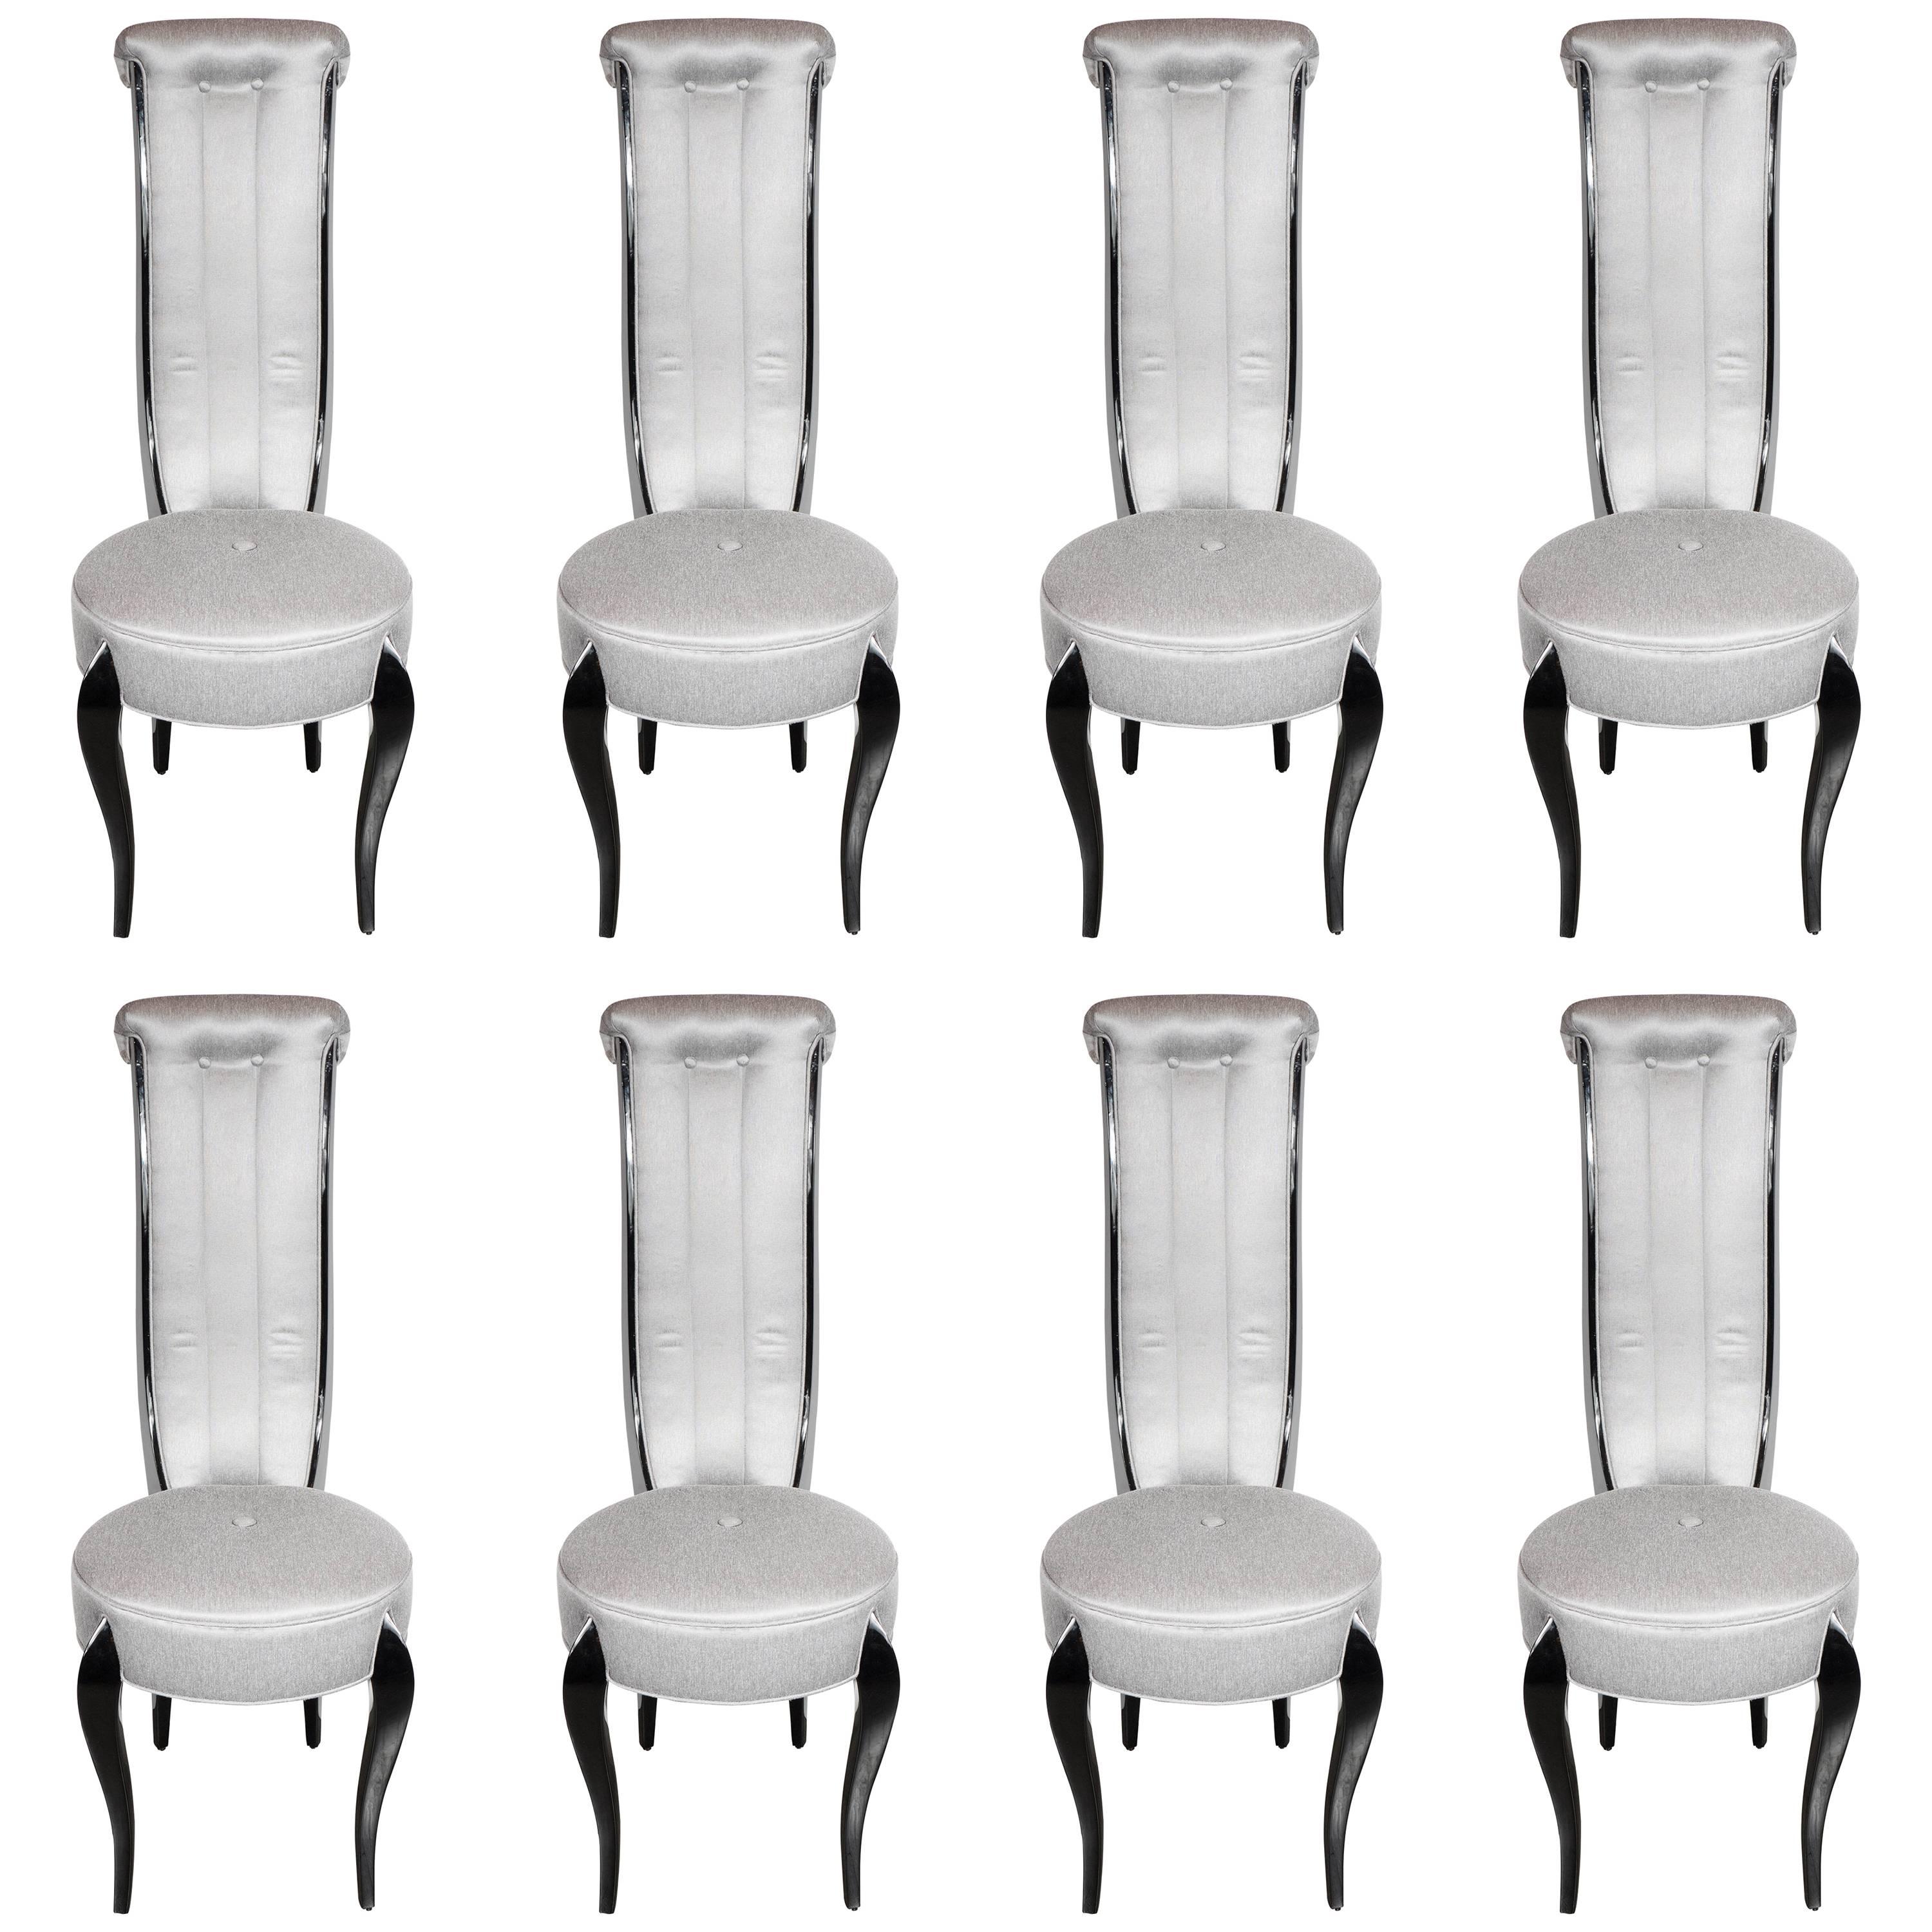 Elegant Set of Eight 1940s Hollywood High Back Dining Chairs in Black Lacquer